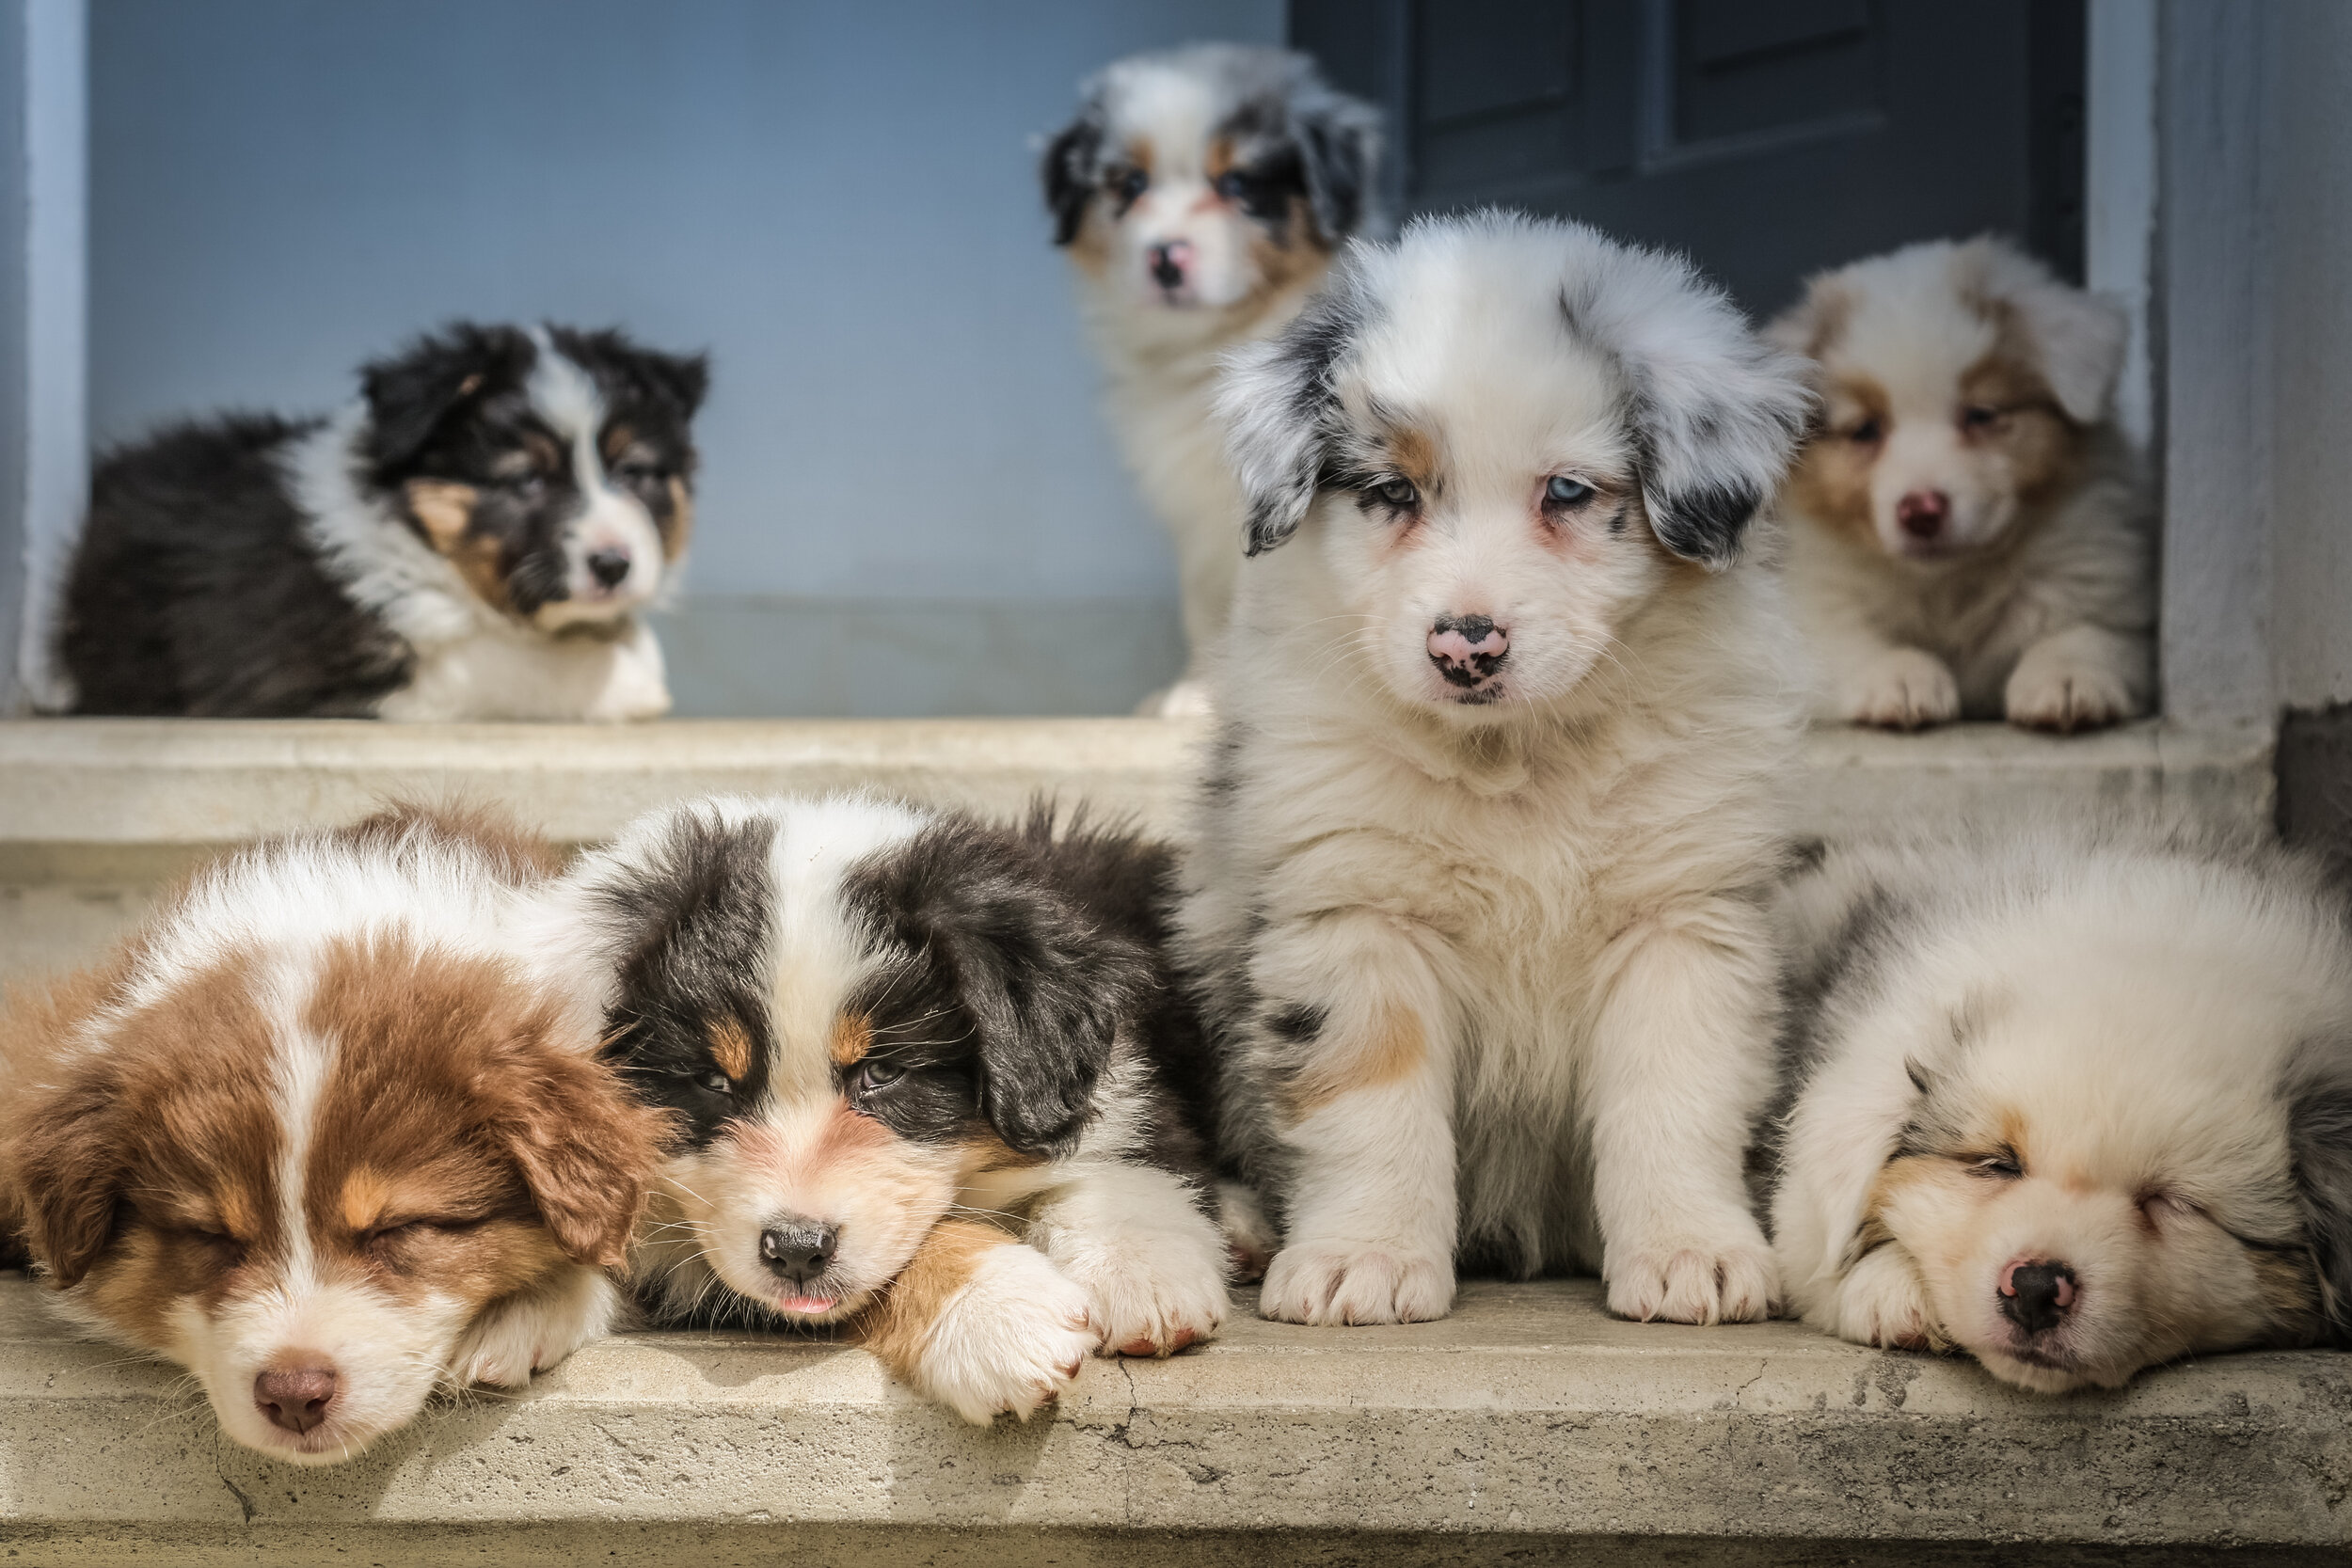 In a litter of puppies, you need to pick only one. The same goes for selecting your programming language.